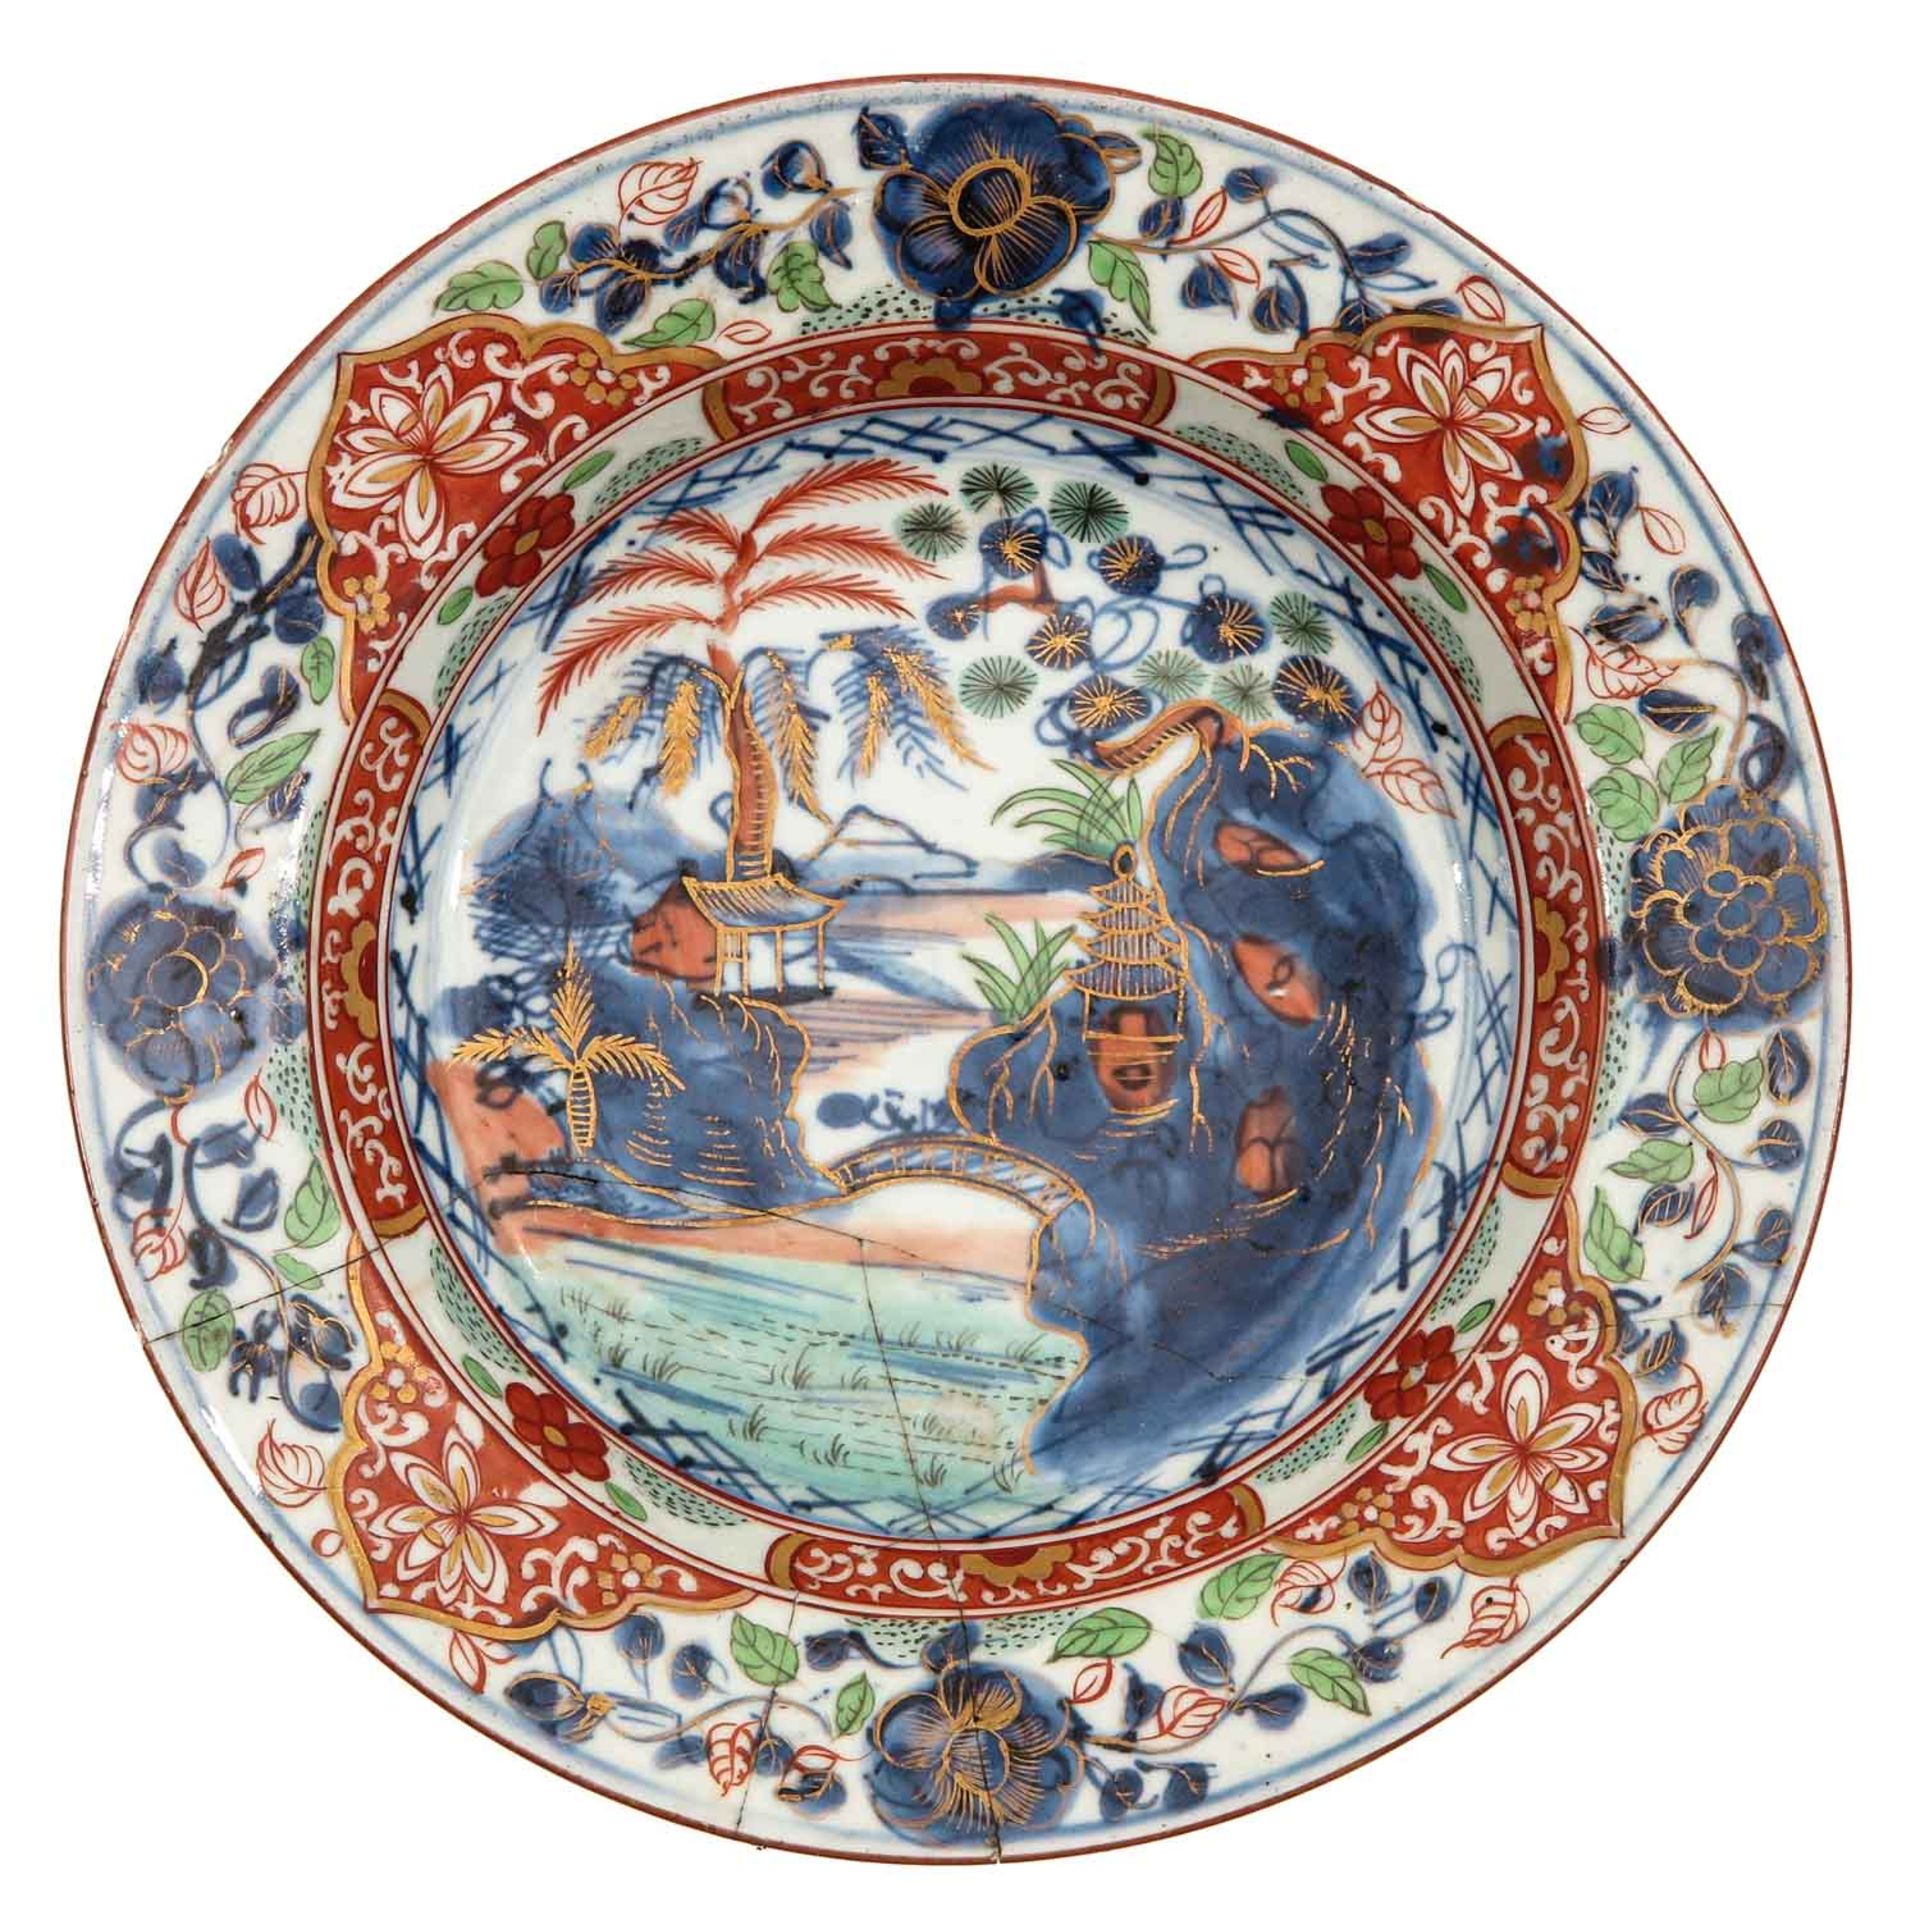 A Series of 3 Polychrome Decor Plates - Image 5 of 10